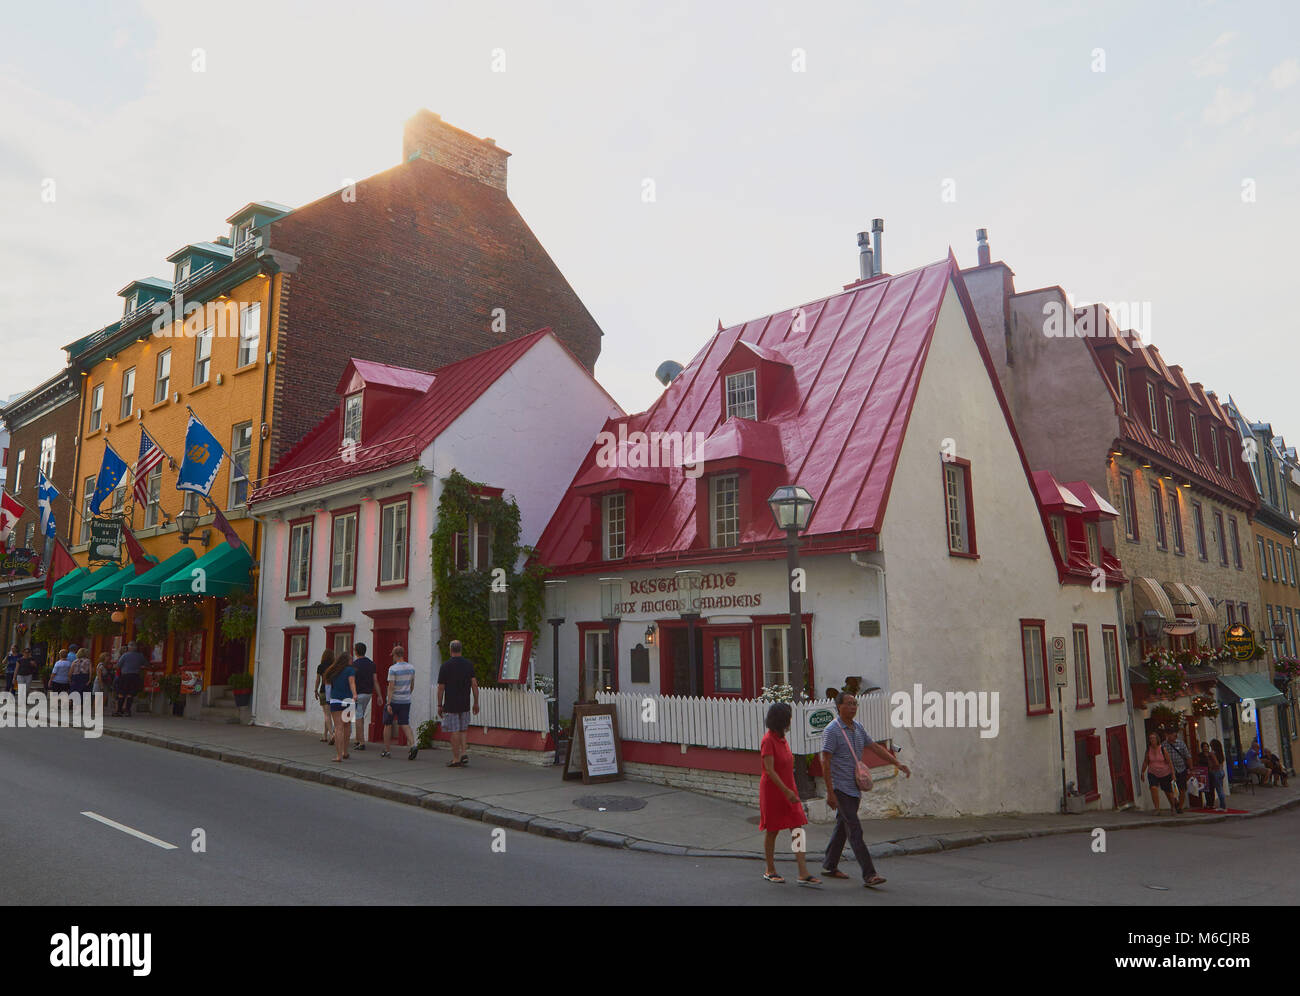 Restaurant Aux Anciens Canadiens, Quebec City, Quebec, Canada. Built in 1675-76 and formerly known as Maison Jaquet, has been a restaurant since 1966 Stock Photo